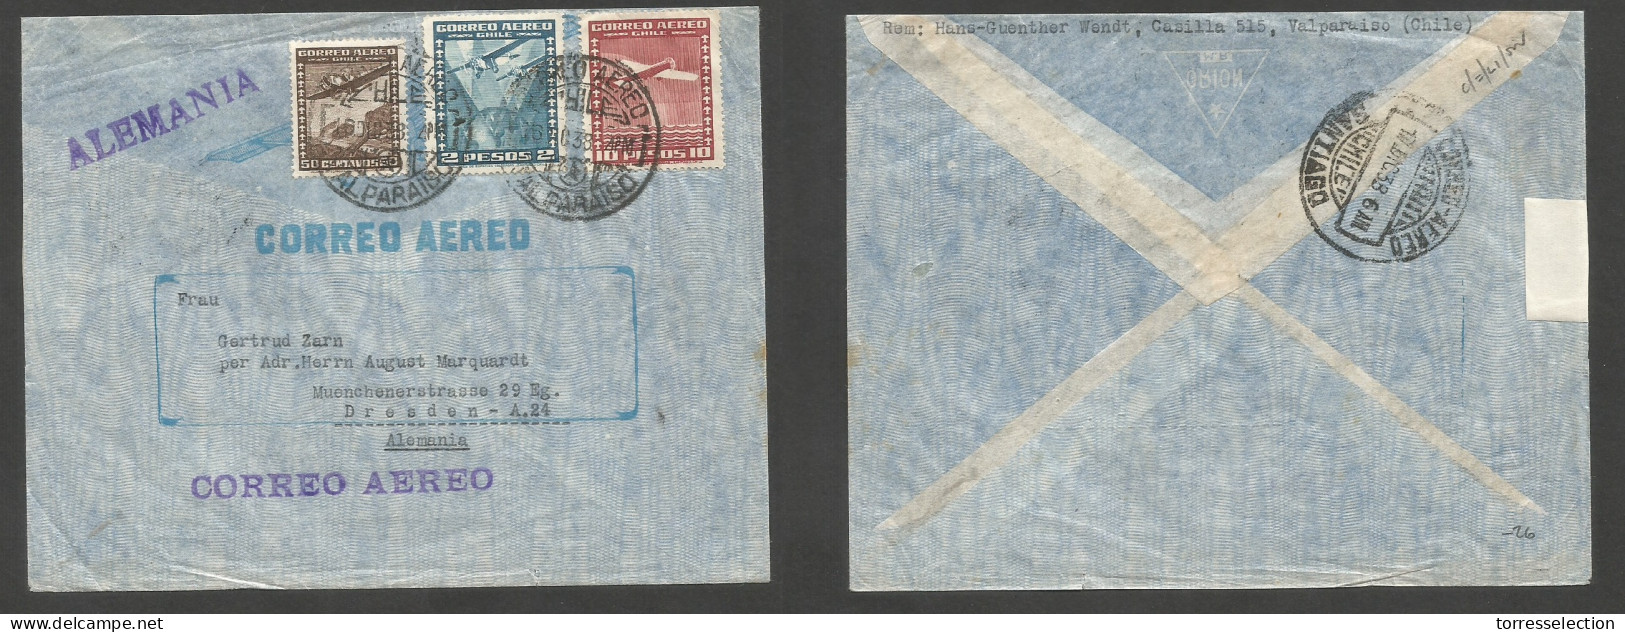 Chile - XX. 1938 (26 Dic) Valp - Germany, Dresden. Air Multifkd Env At 12,50 Pesos Rate. Fine. XSALE. - Chili